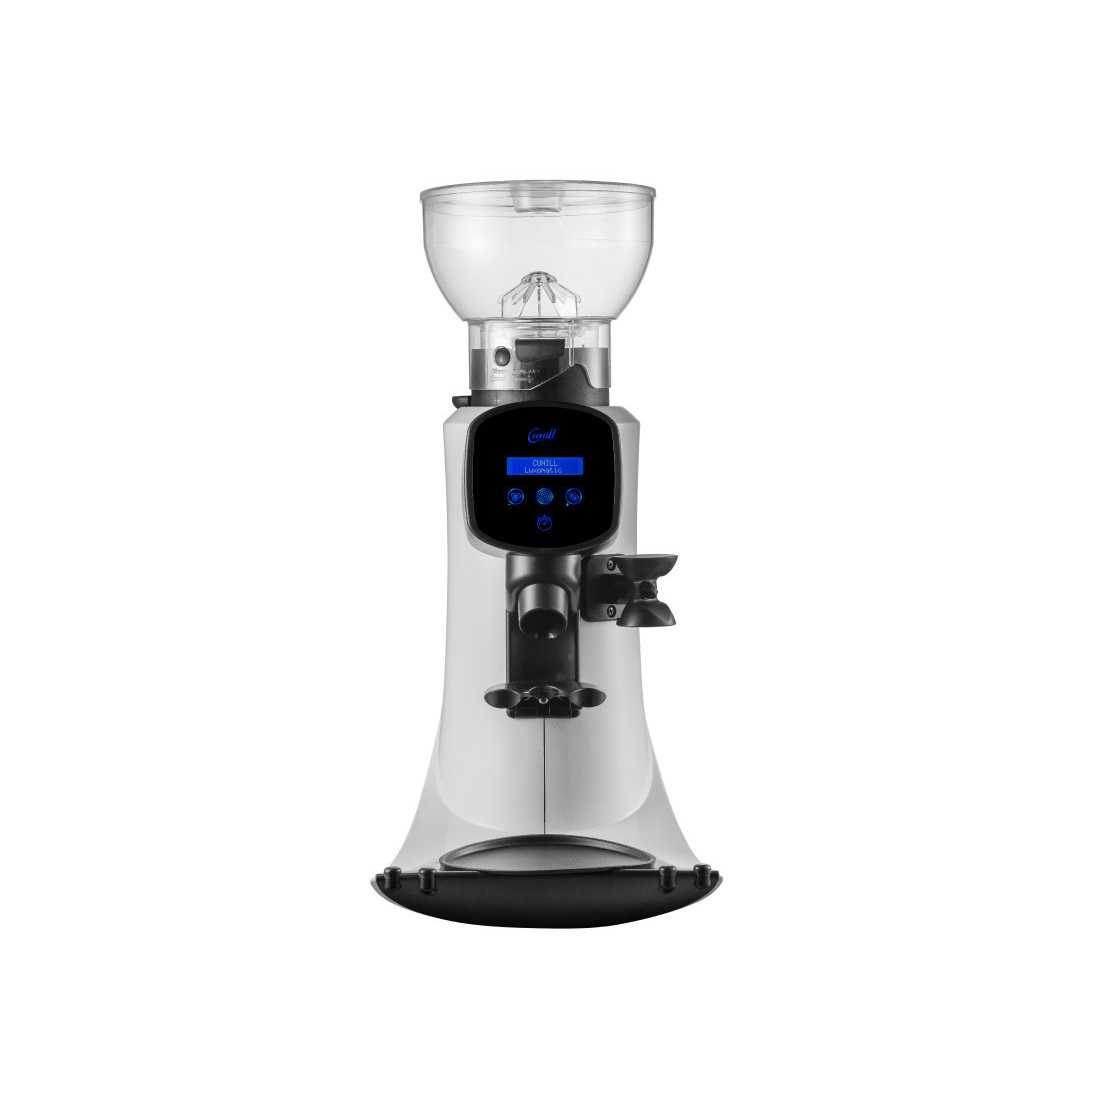 Cunill Luxomatic Automatic On Demand Coffee Grinder